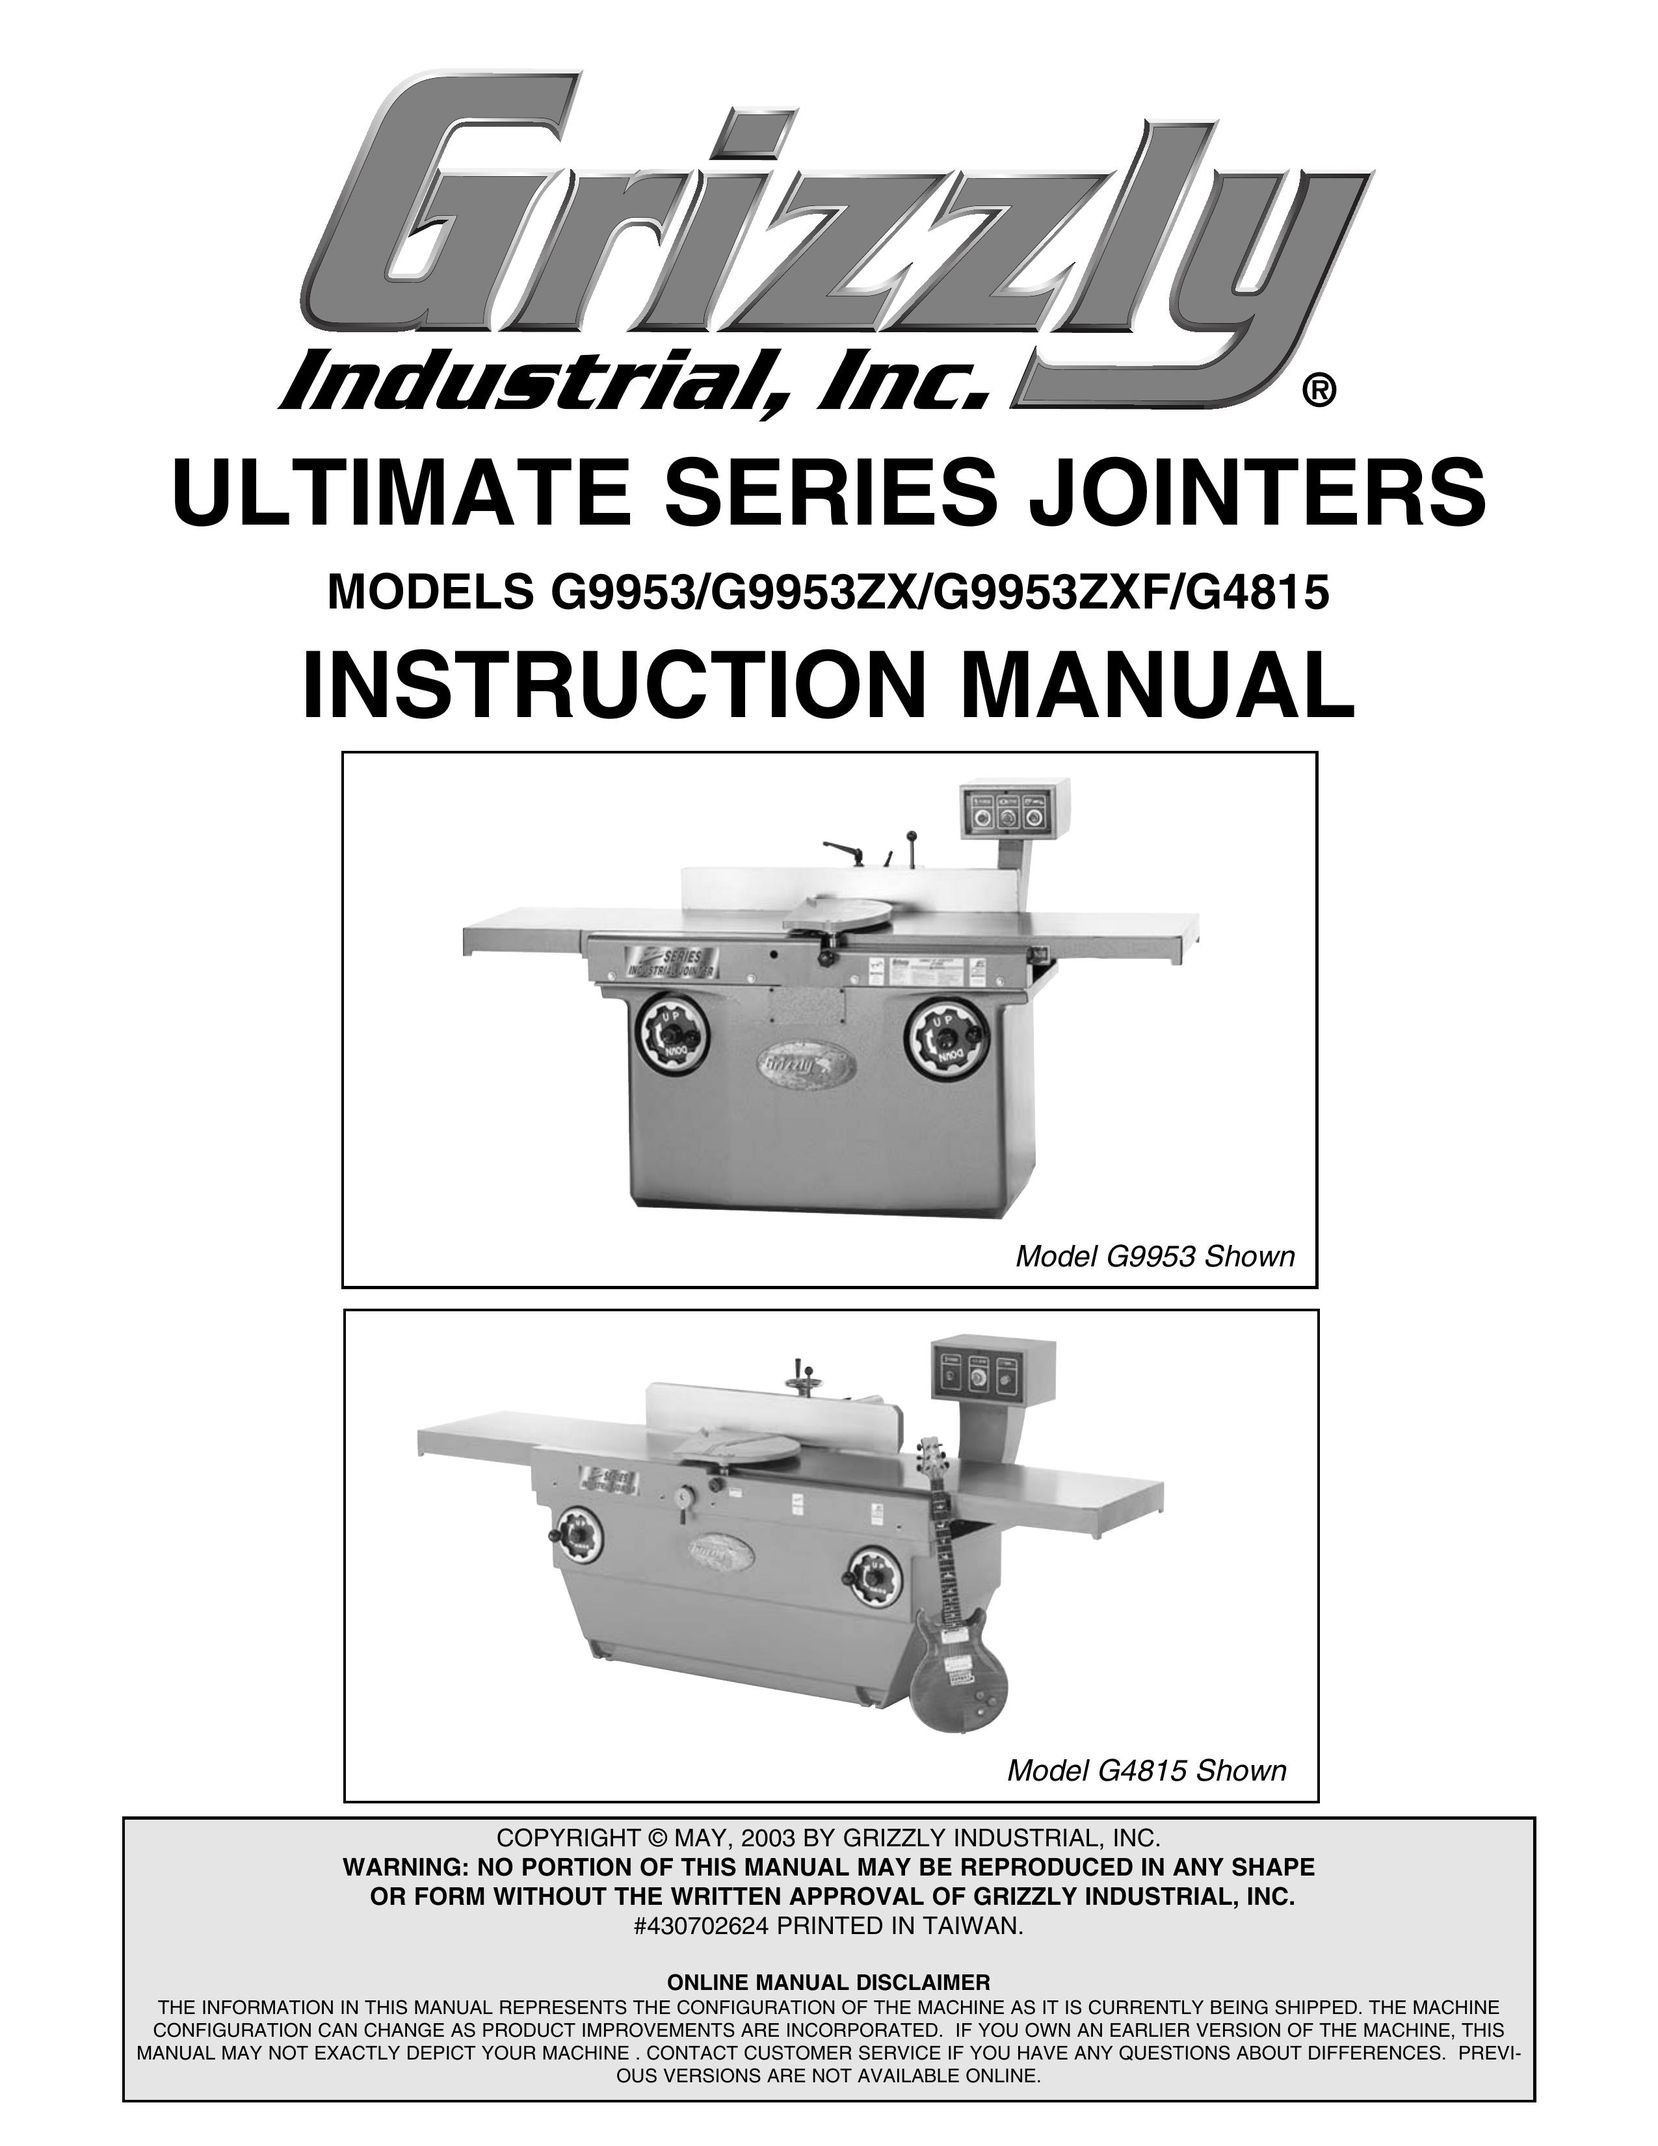 Grizzly G9953ZXF Biscuit Joiner User Manual